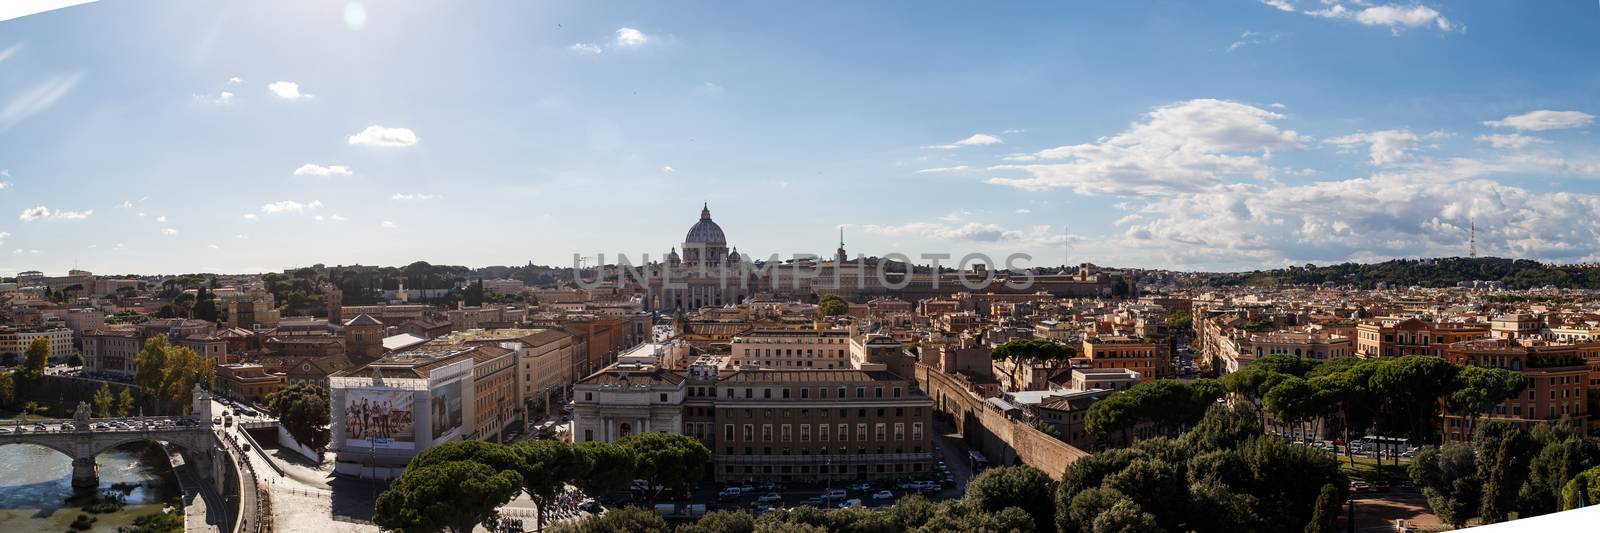 ROME, ITALY - SEPTEMBER 25, 2015 : Top view of historical city of Rome with domes, on cloudy blue sky background.